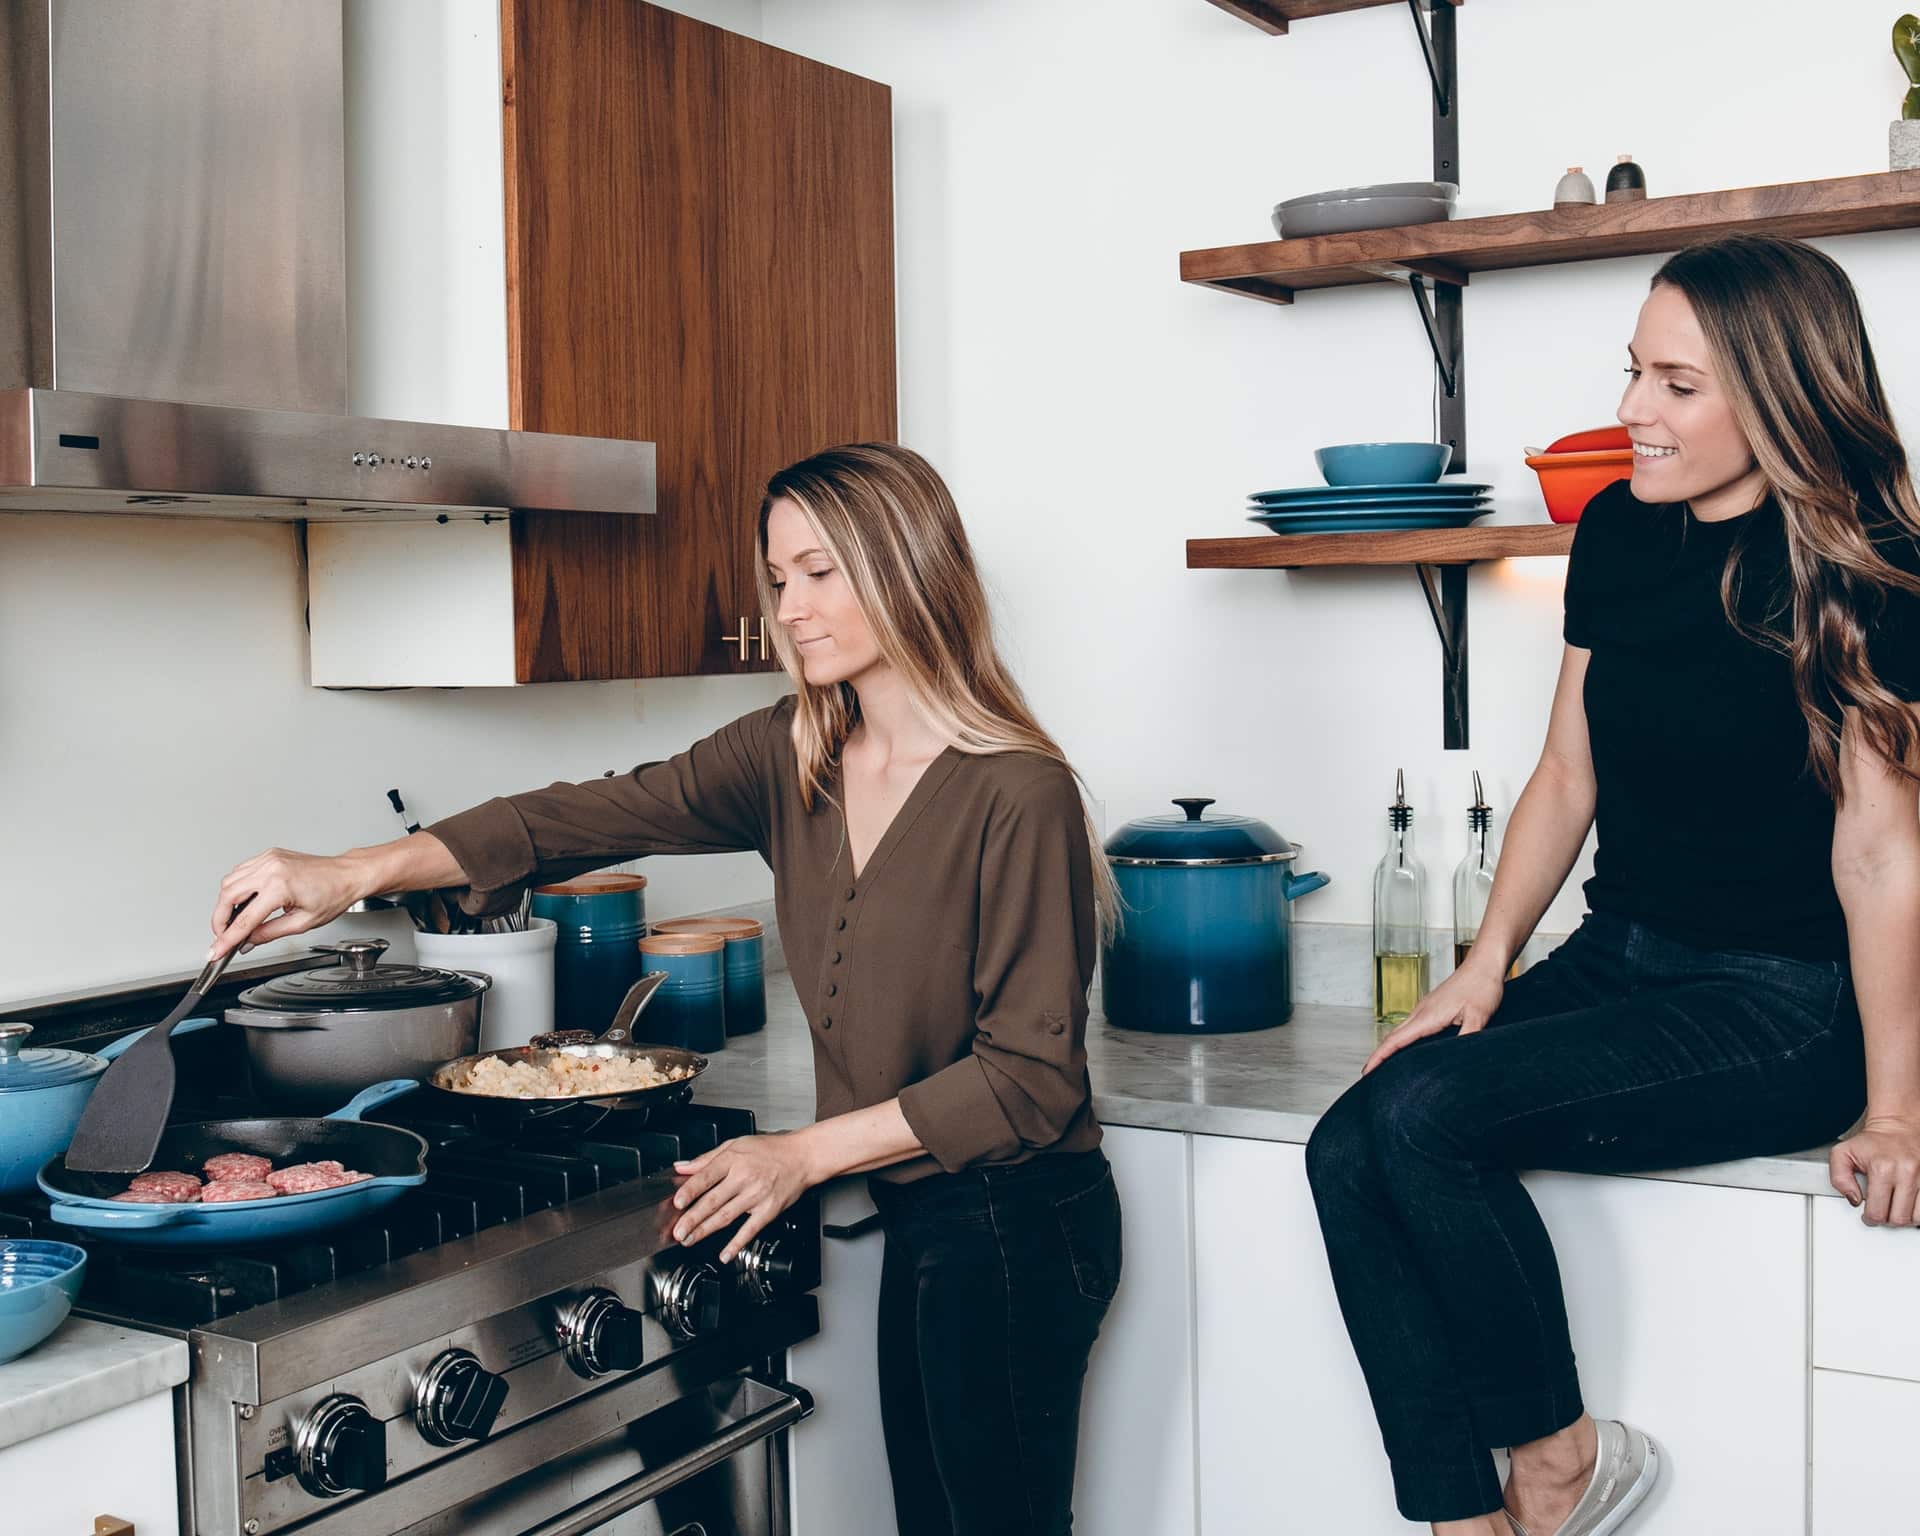 https://www.repaircare.ca/wp-content/uploads/2016/04/two-women-cooking-on-stove.jpg